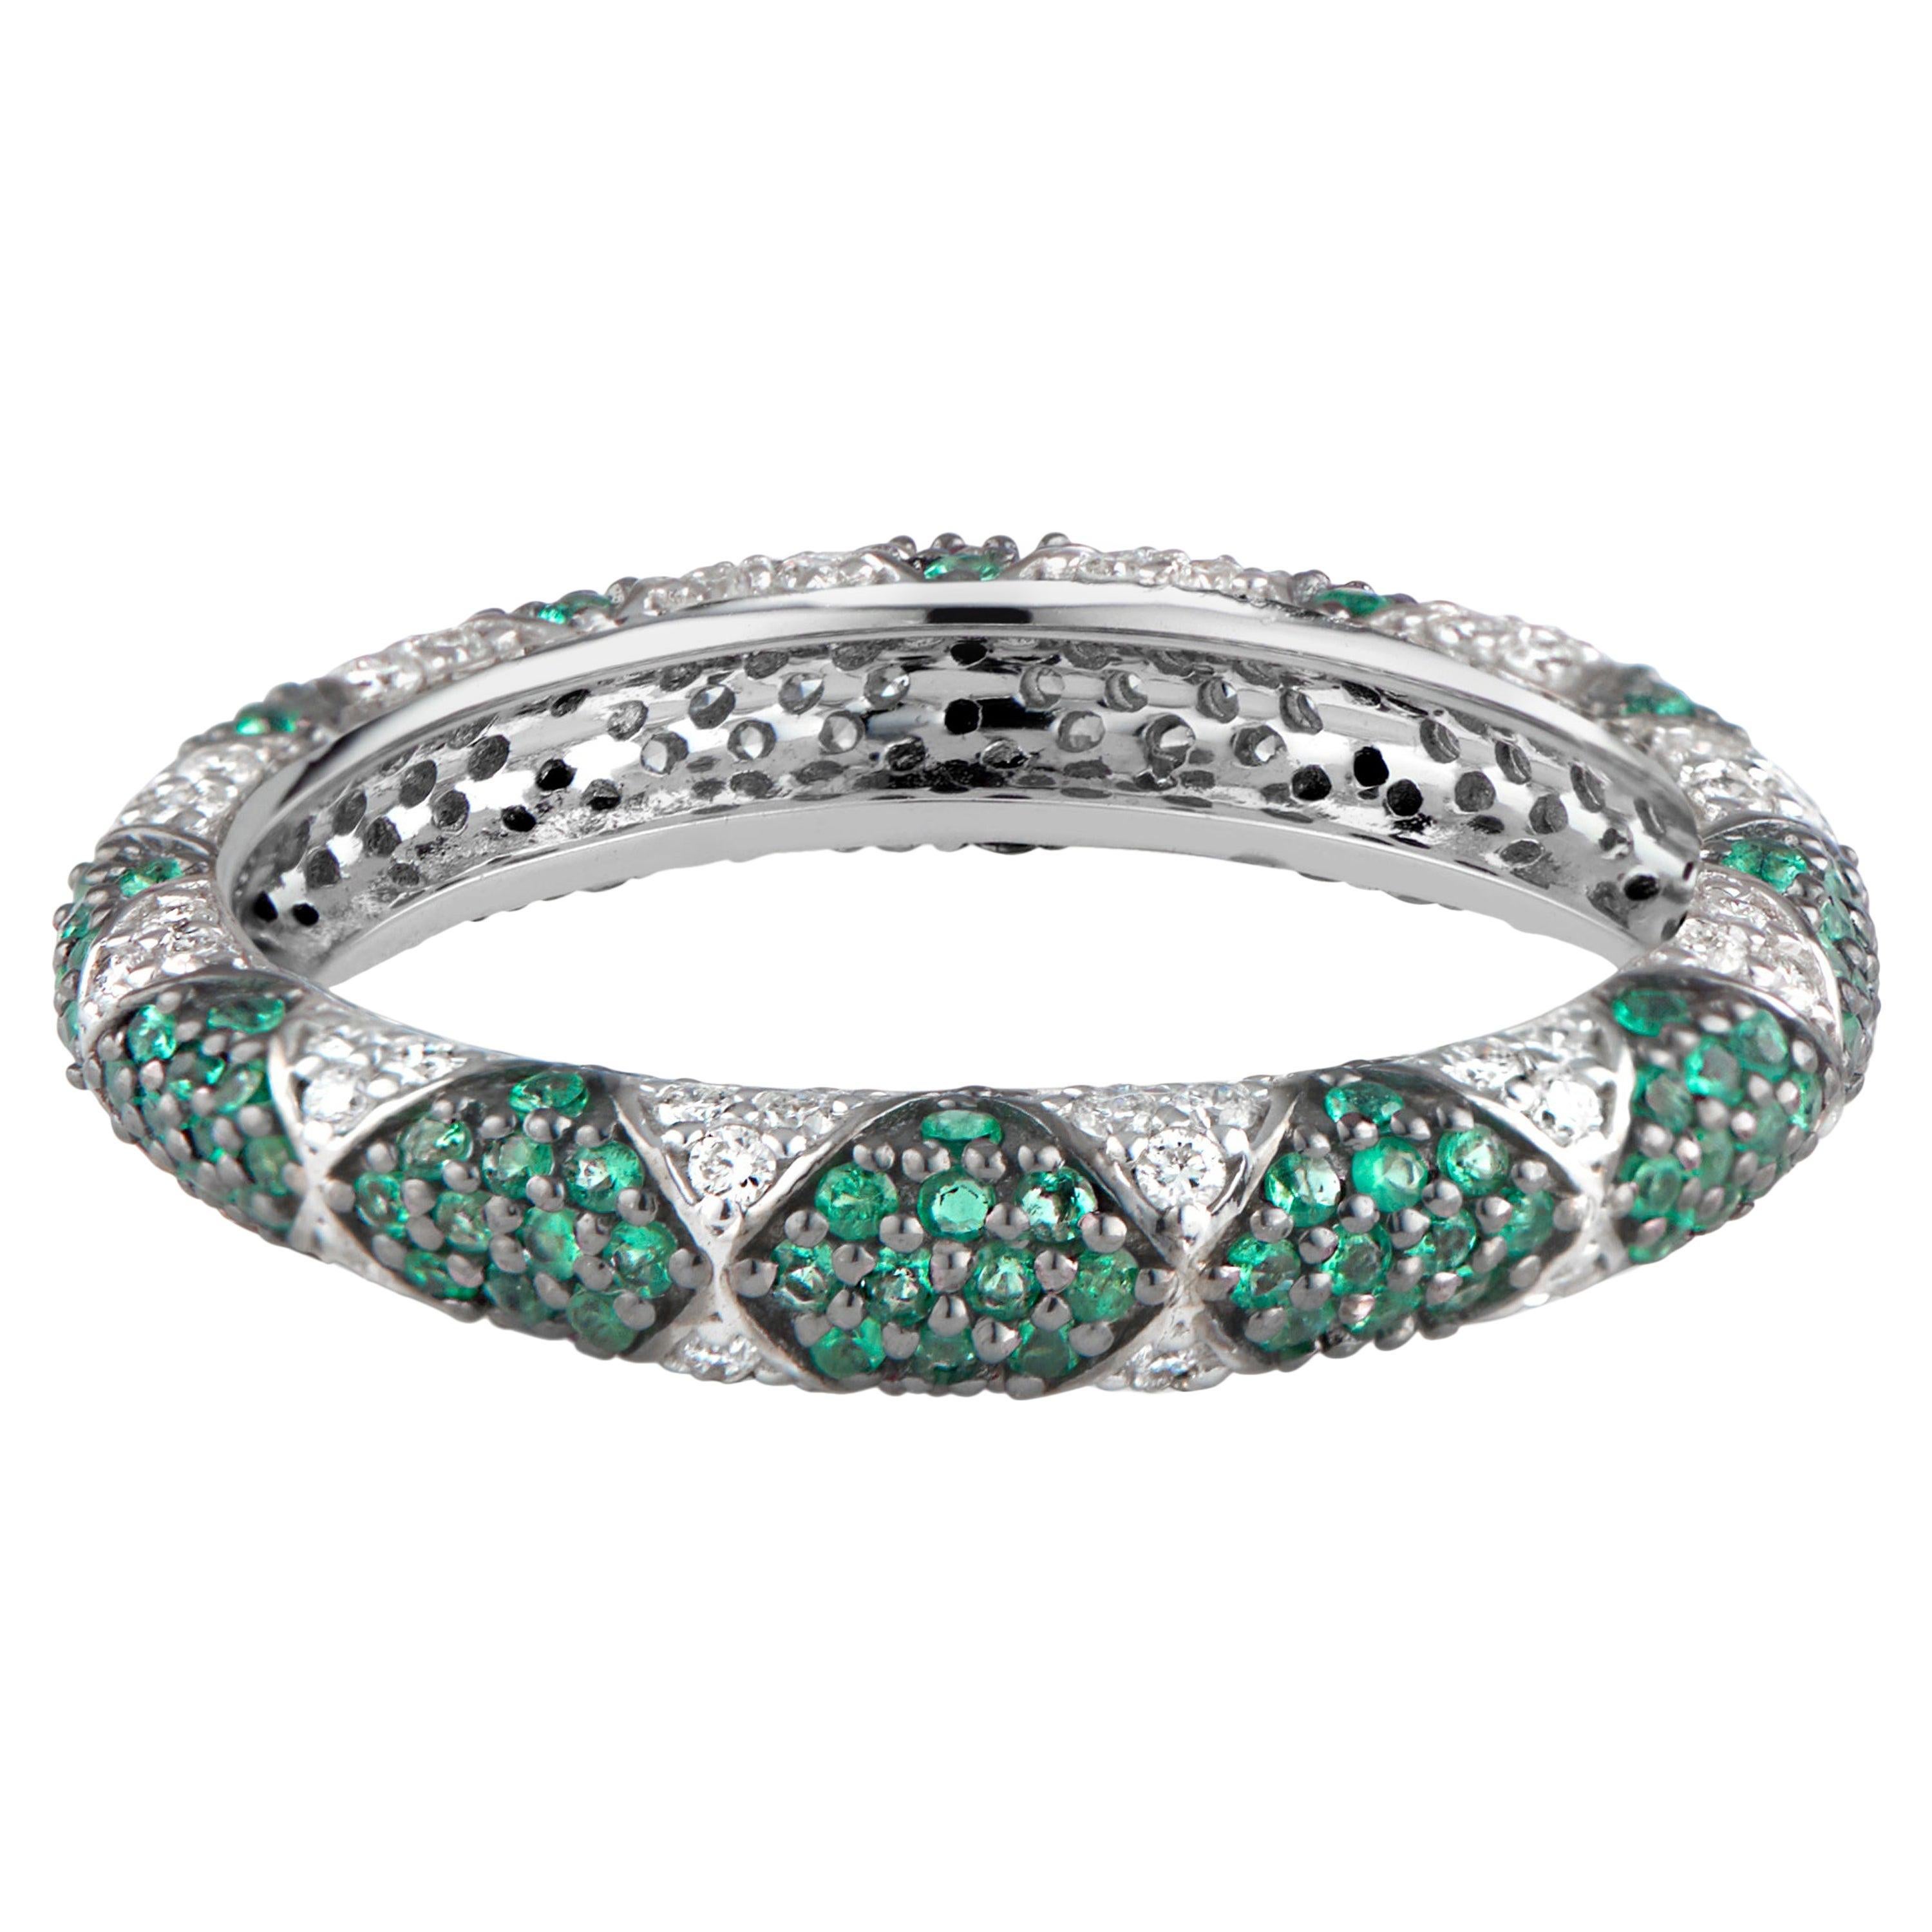 Lotus Eternity Band Ring with White Diamond Petals and Pave Set Emeralds